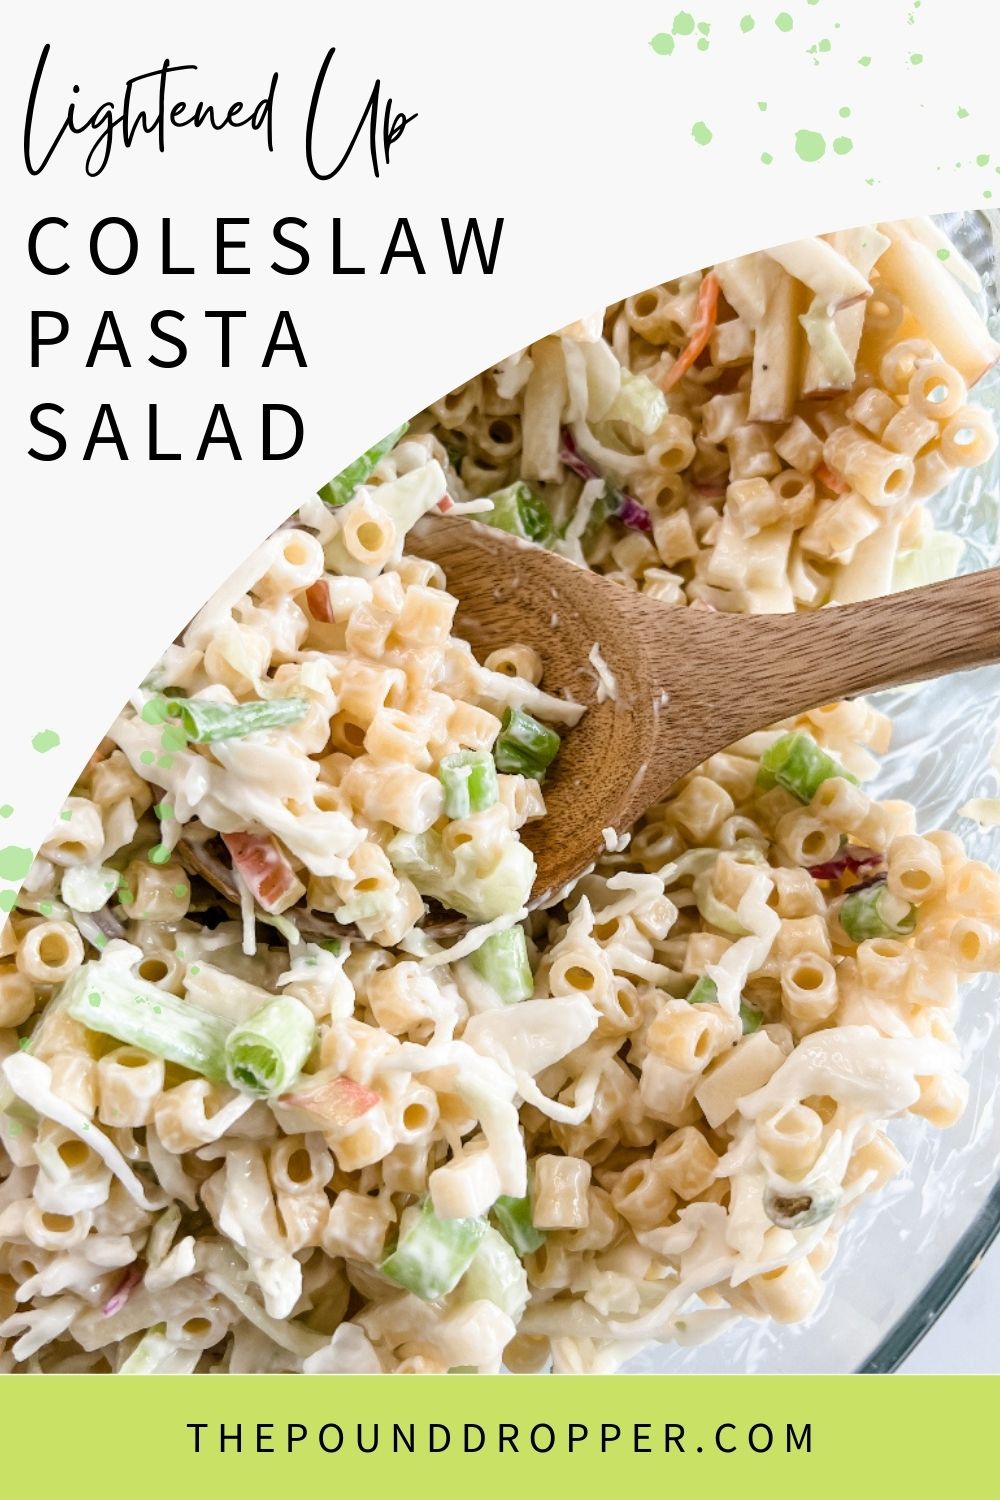 This Lightened Up Coleslaw Macaroni Salad is an easy summer side dish that combines two favorite summer salads: coleslaw and macaroni salad-packed with pasta, coleslaw, celery, diced apples-the combination of two favorite summer salads: coleslaw and macaroni salad! This is an easy and delicious dish to take to a potluck or your next BBQ. via @pounddropper